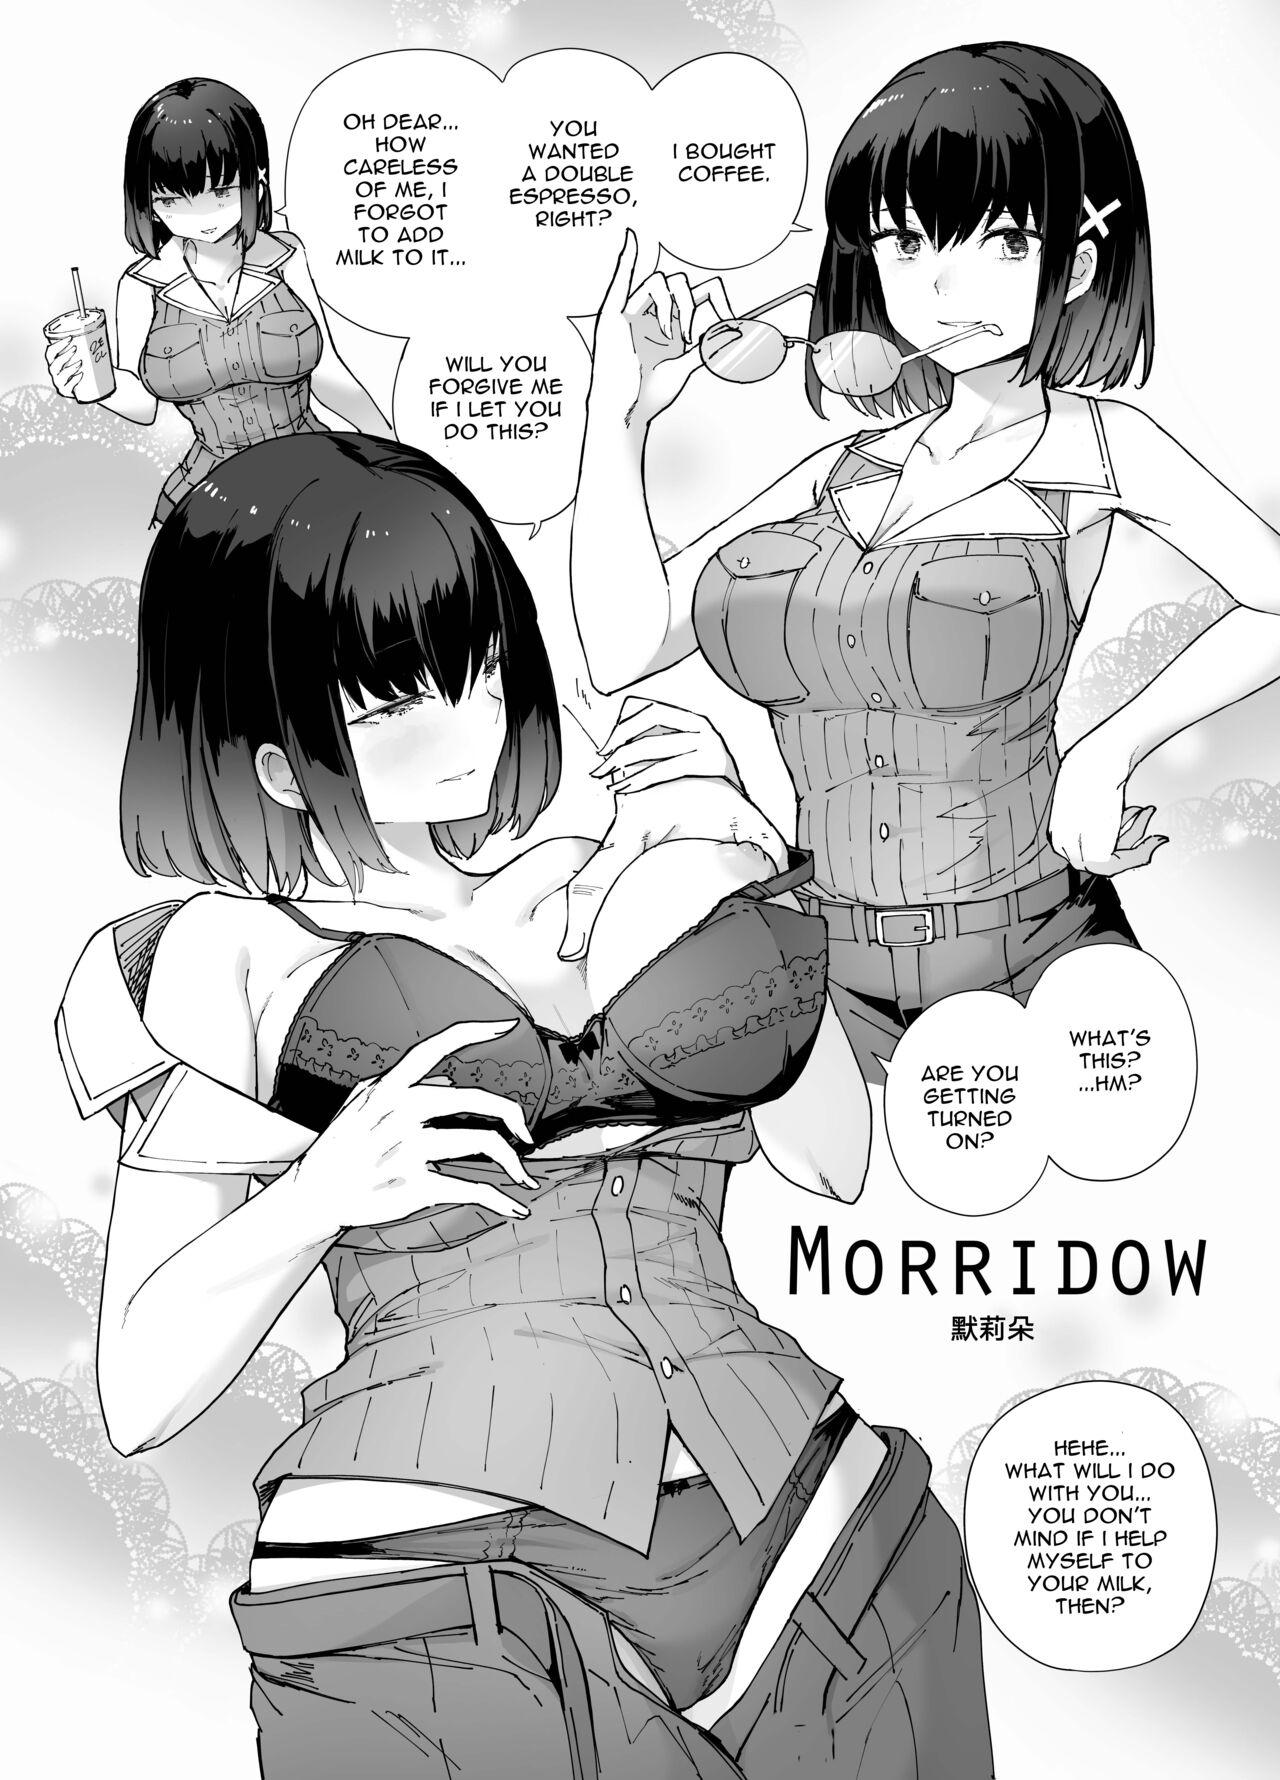 Exgf NPC & Mobs 12p Issue - Girls frontline Gaystraight - Page 2